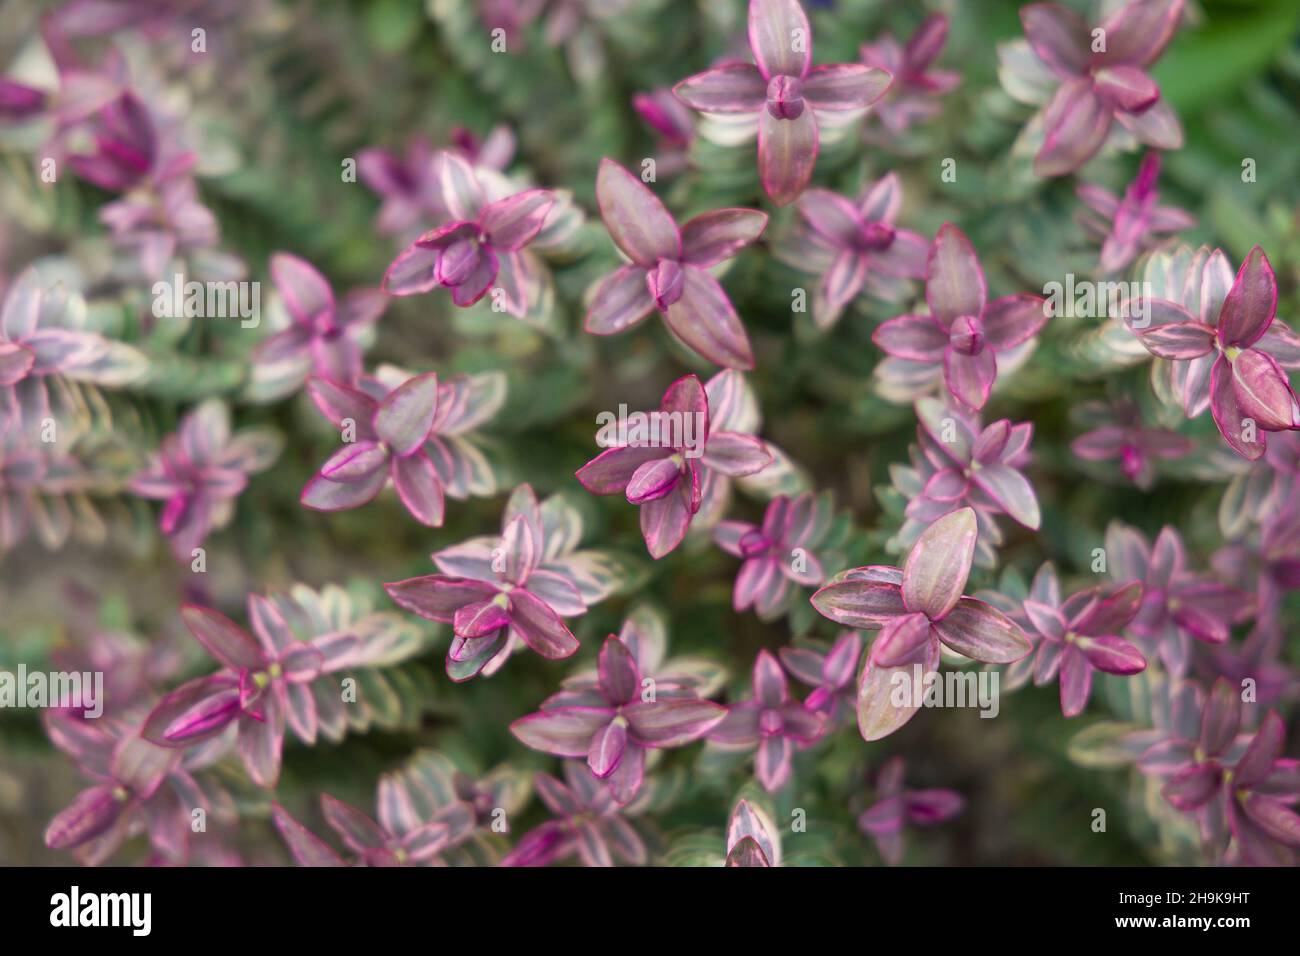 Hebe silver dollar, close up variegated foliage in a UK garden Stock Photo